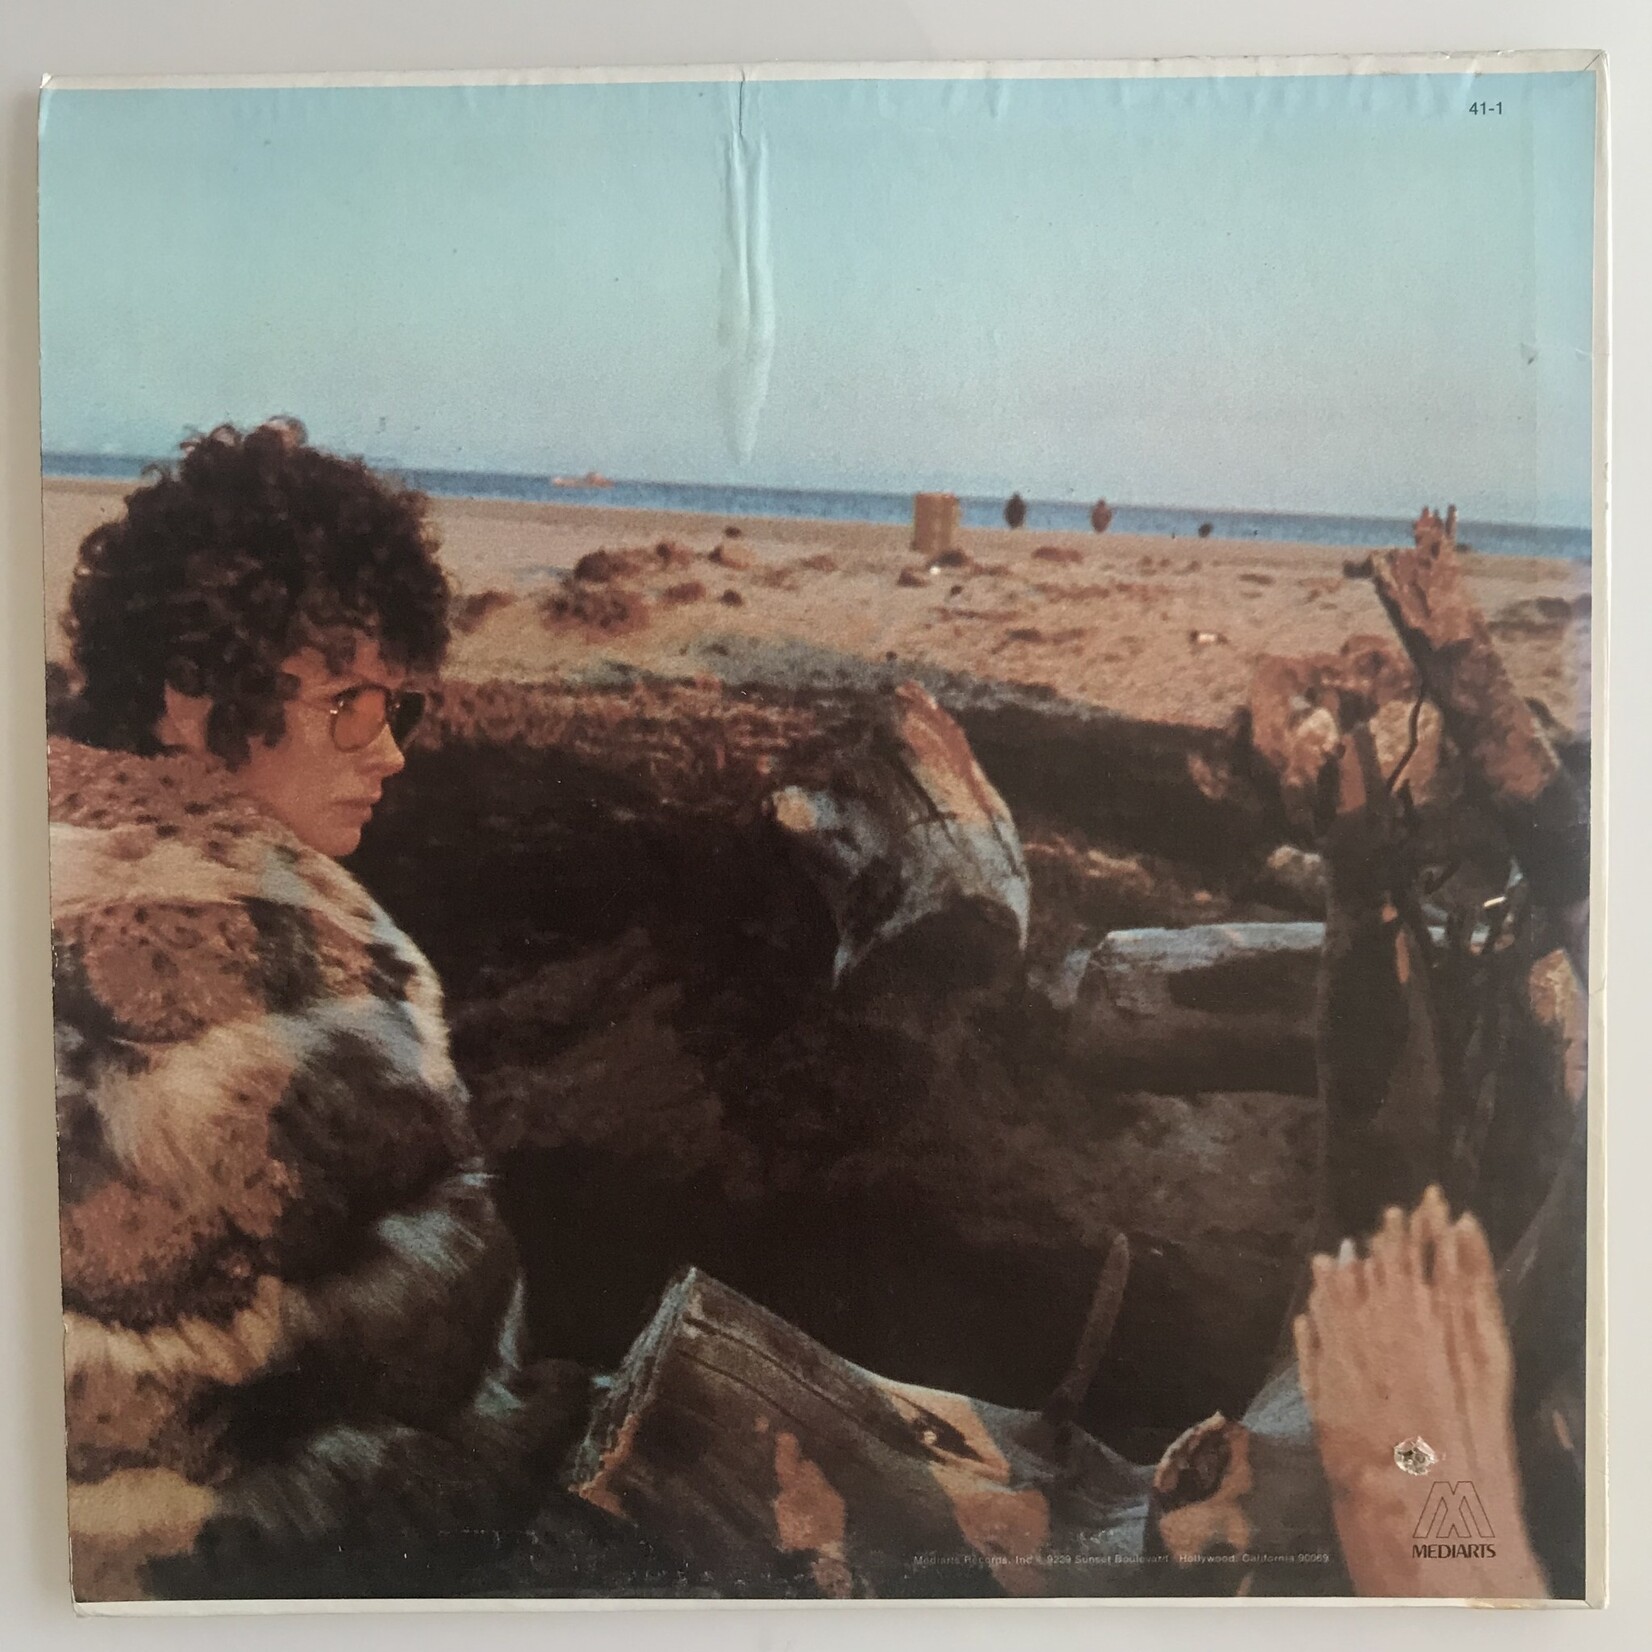 Dory Previn - On My Way To Where - Vinyl LP (USED)